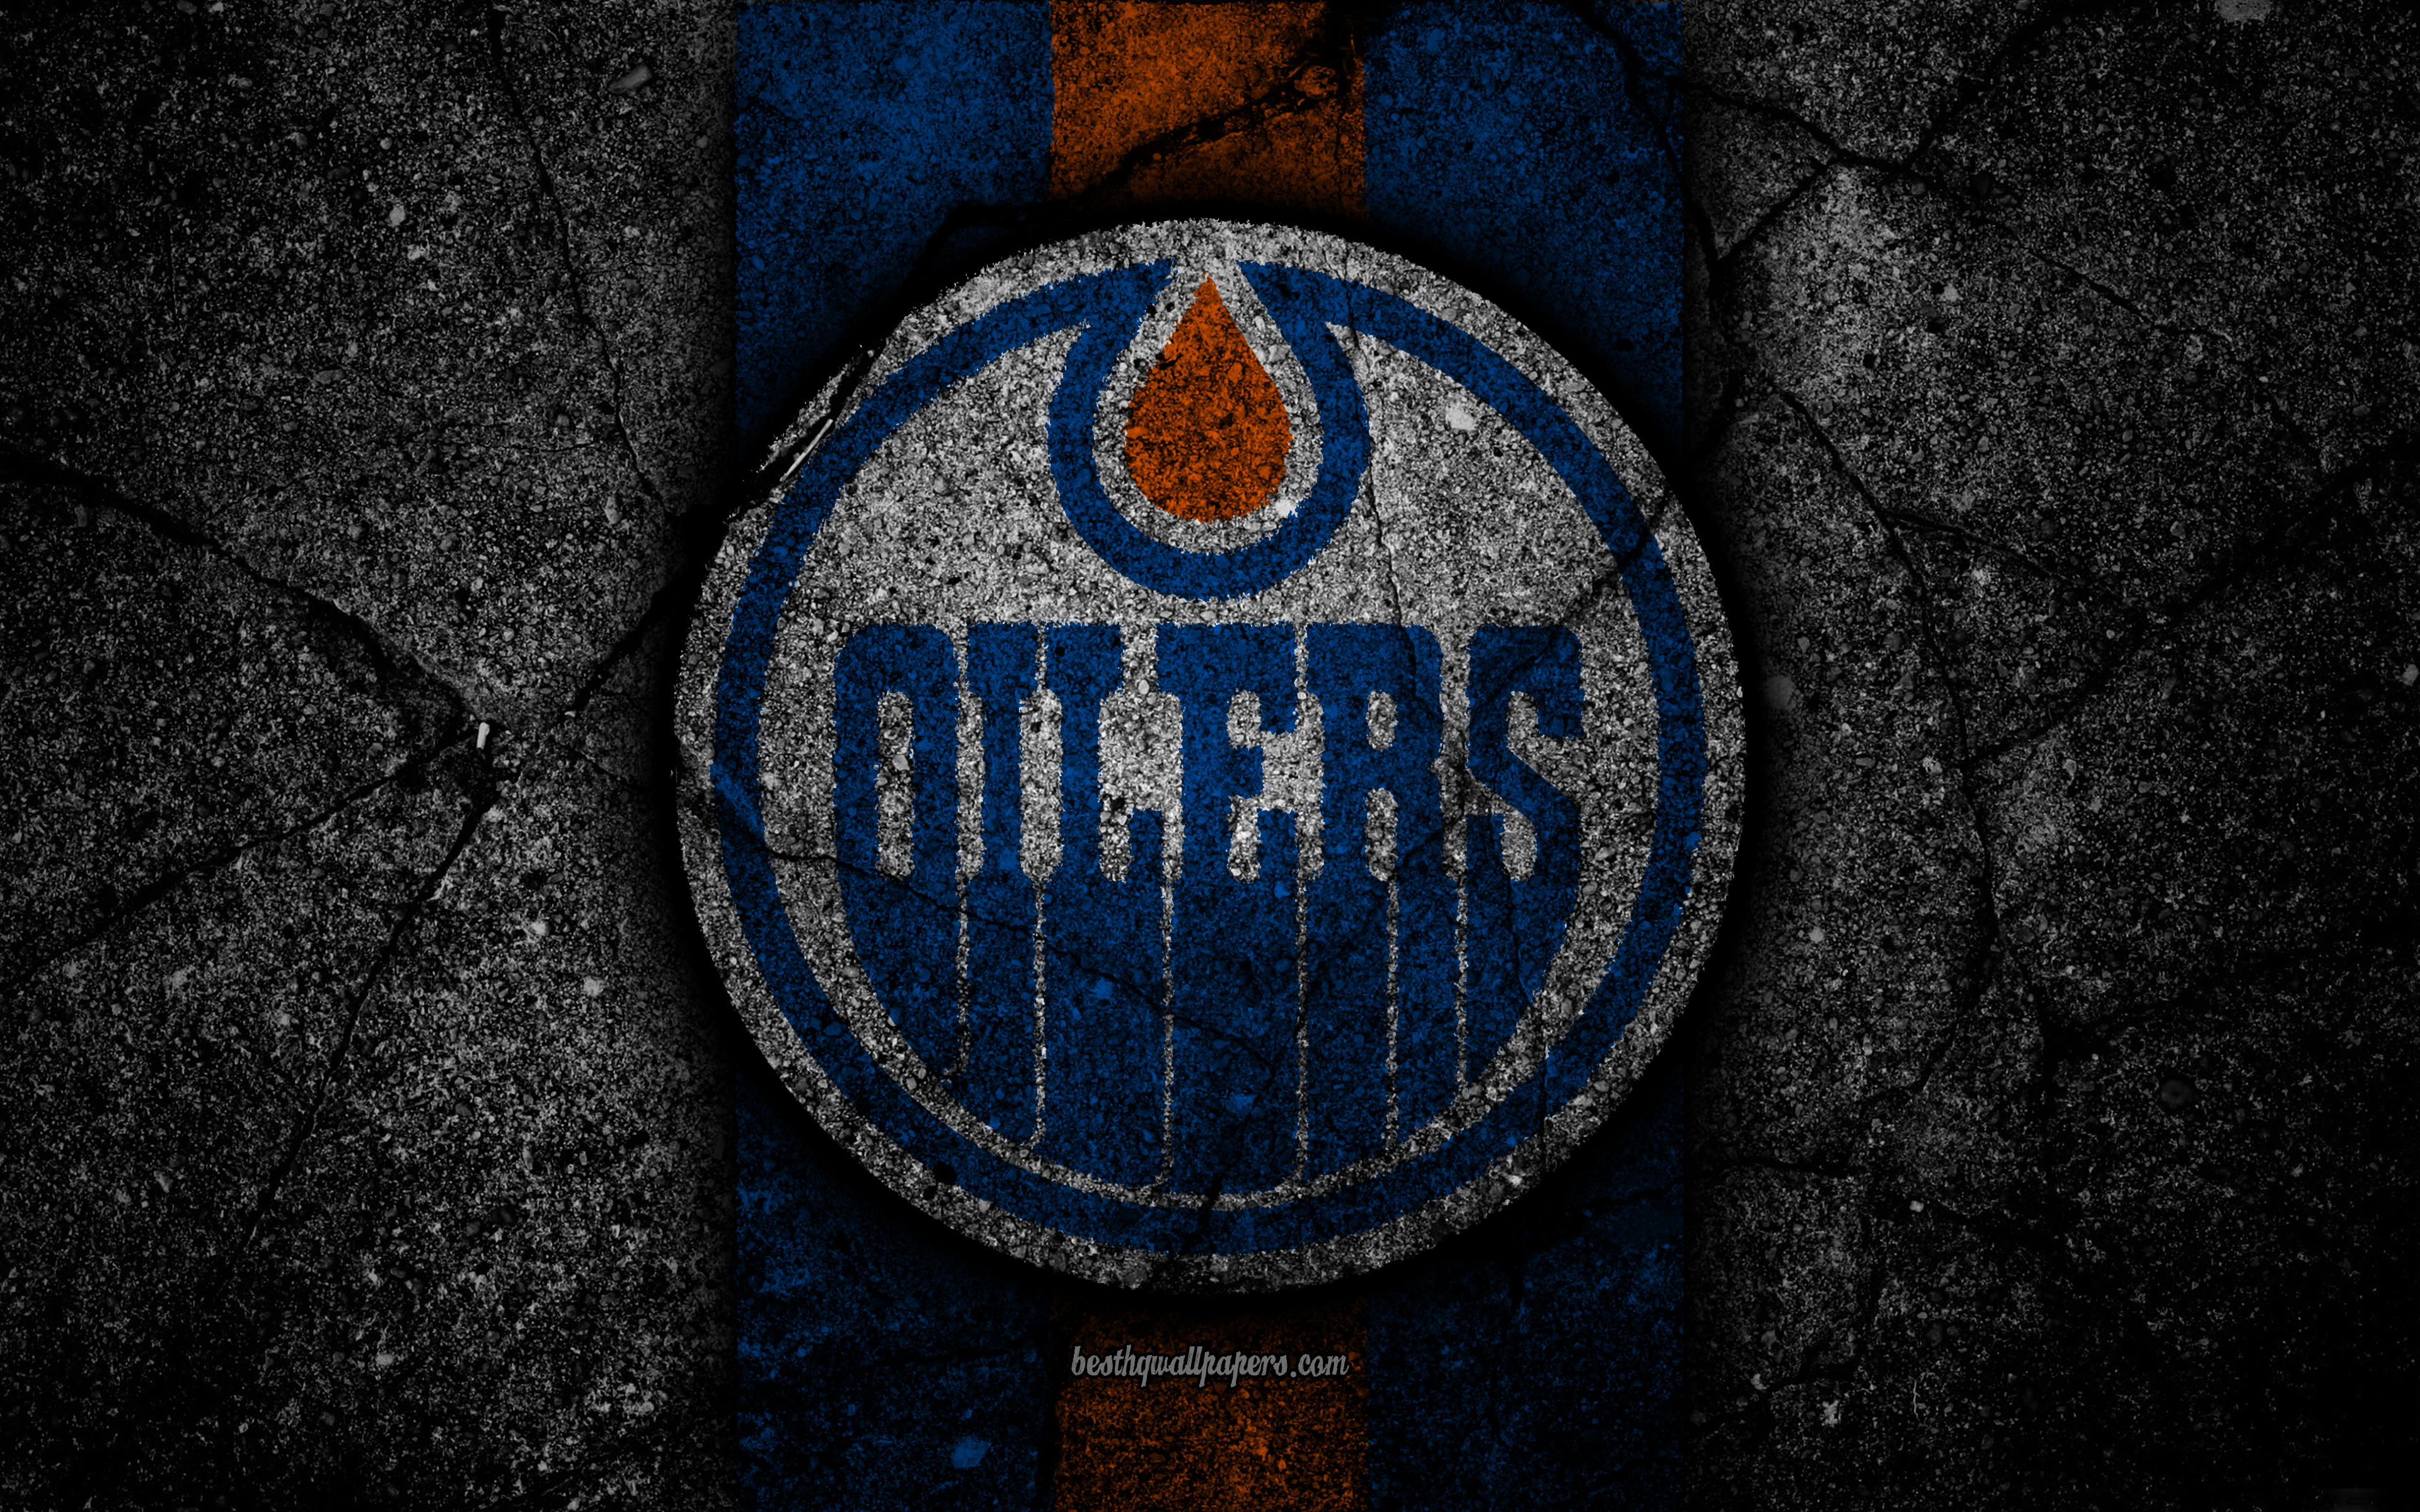 Download wallpaper 4k, Edmonton Oilers, logo, hockey club, NHL, black stone, Western Conference, USA, Asphalt texture, hockey, Pacific Division for desktop with resolution 3840x2400. High Quality HD picture wallpaper